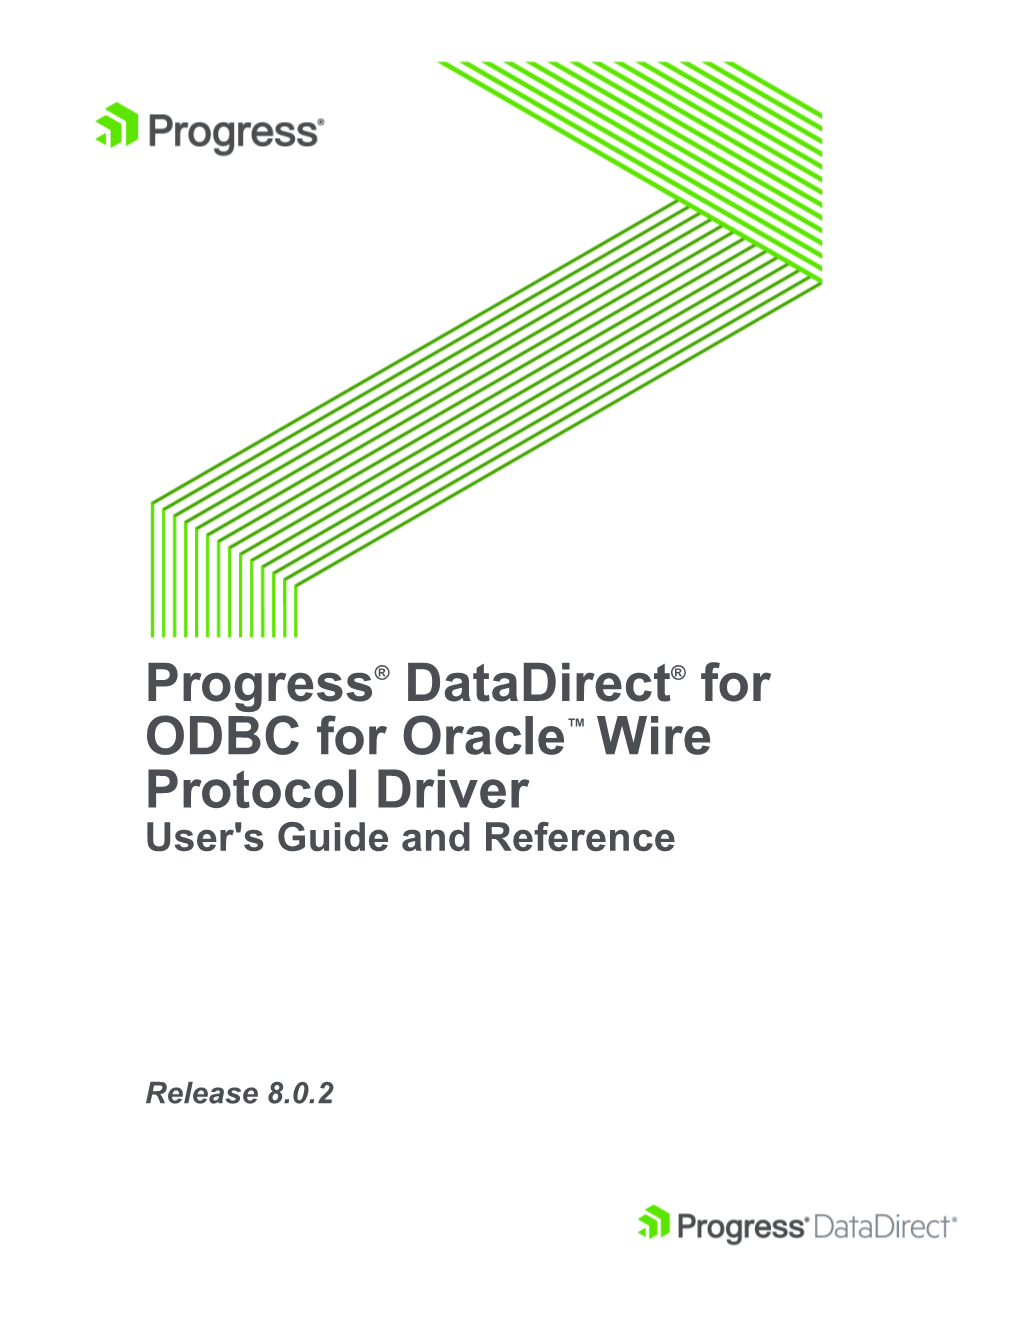 Progress® Datadirect® for ODBC for Oracle™ Wire Protocol Driver User©S Guide and Reference